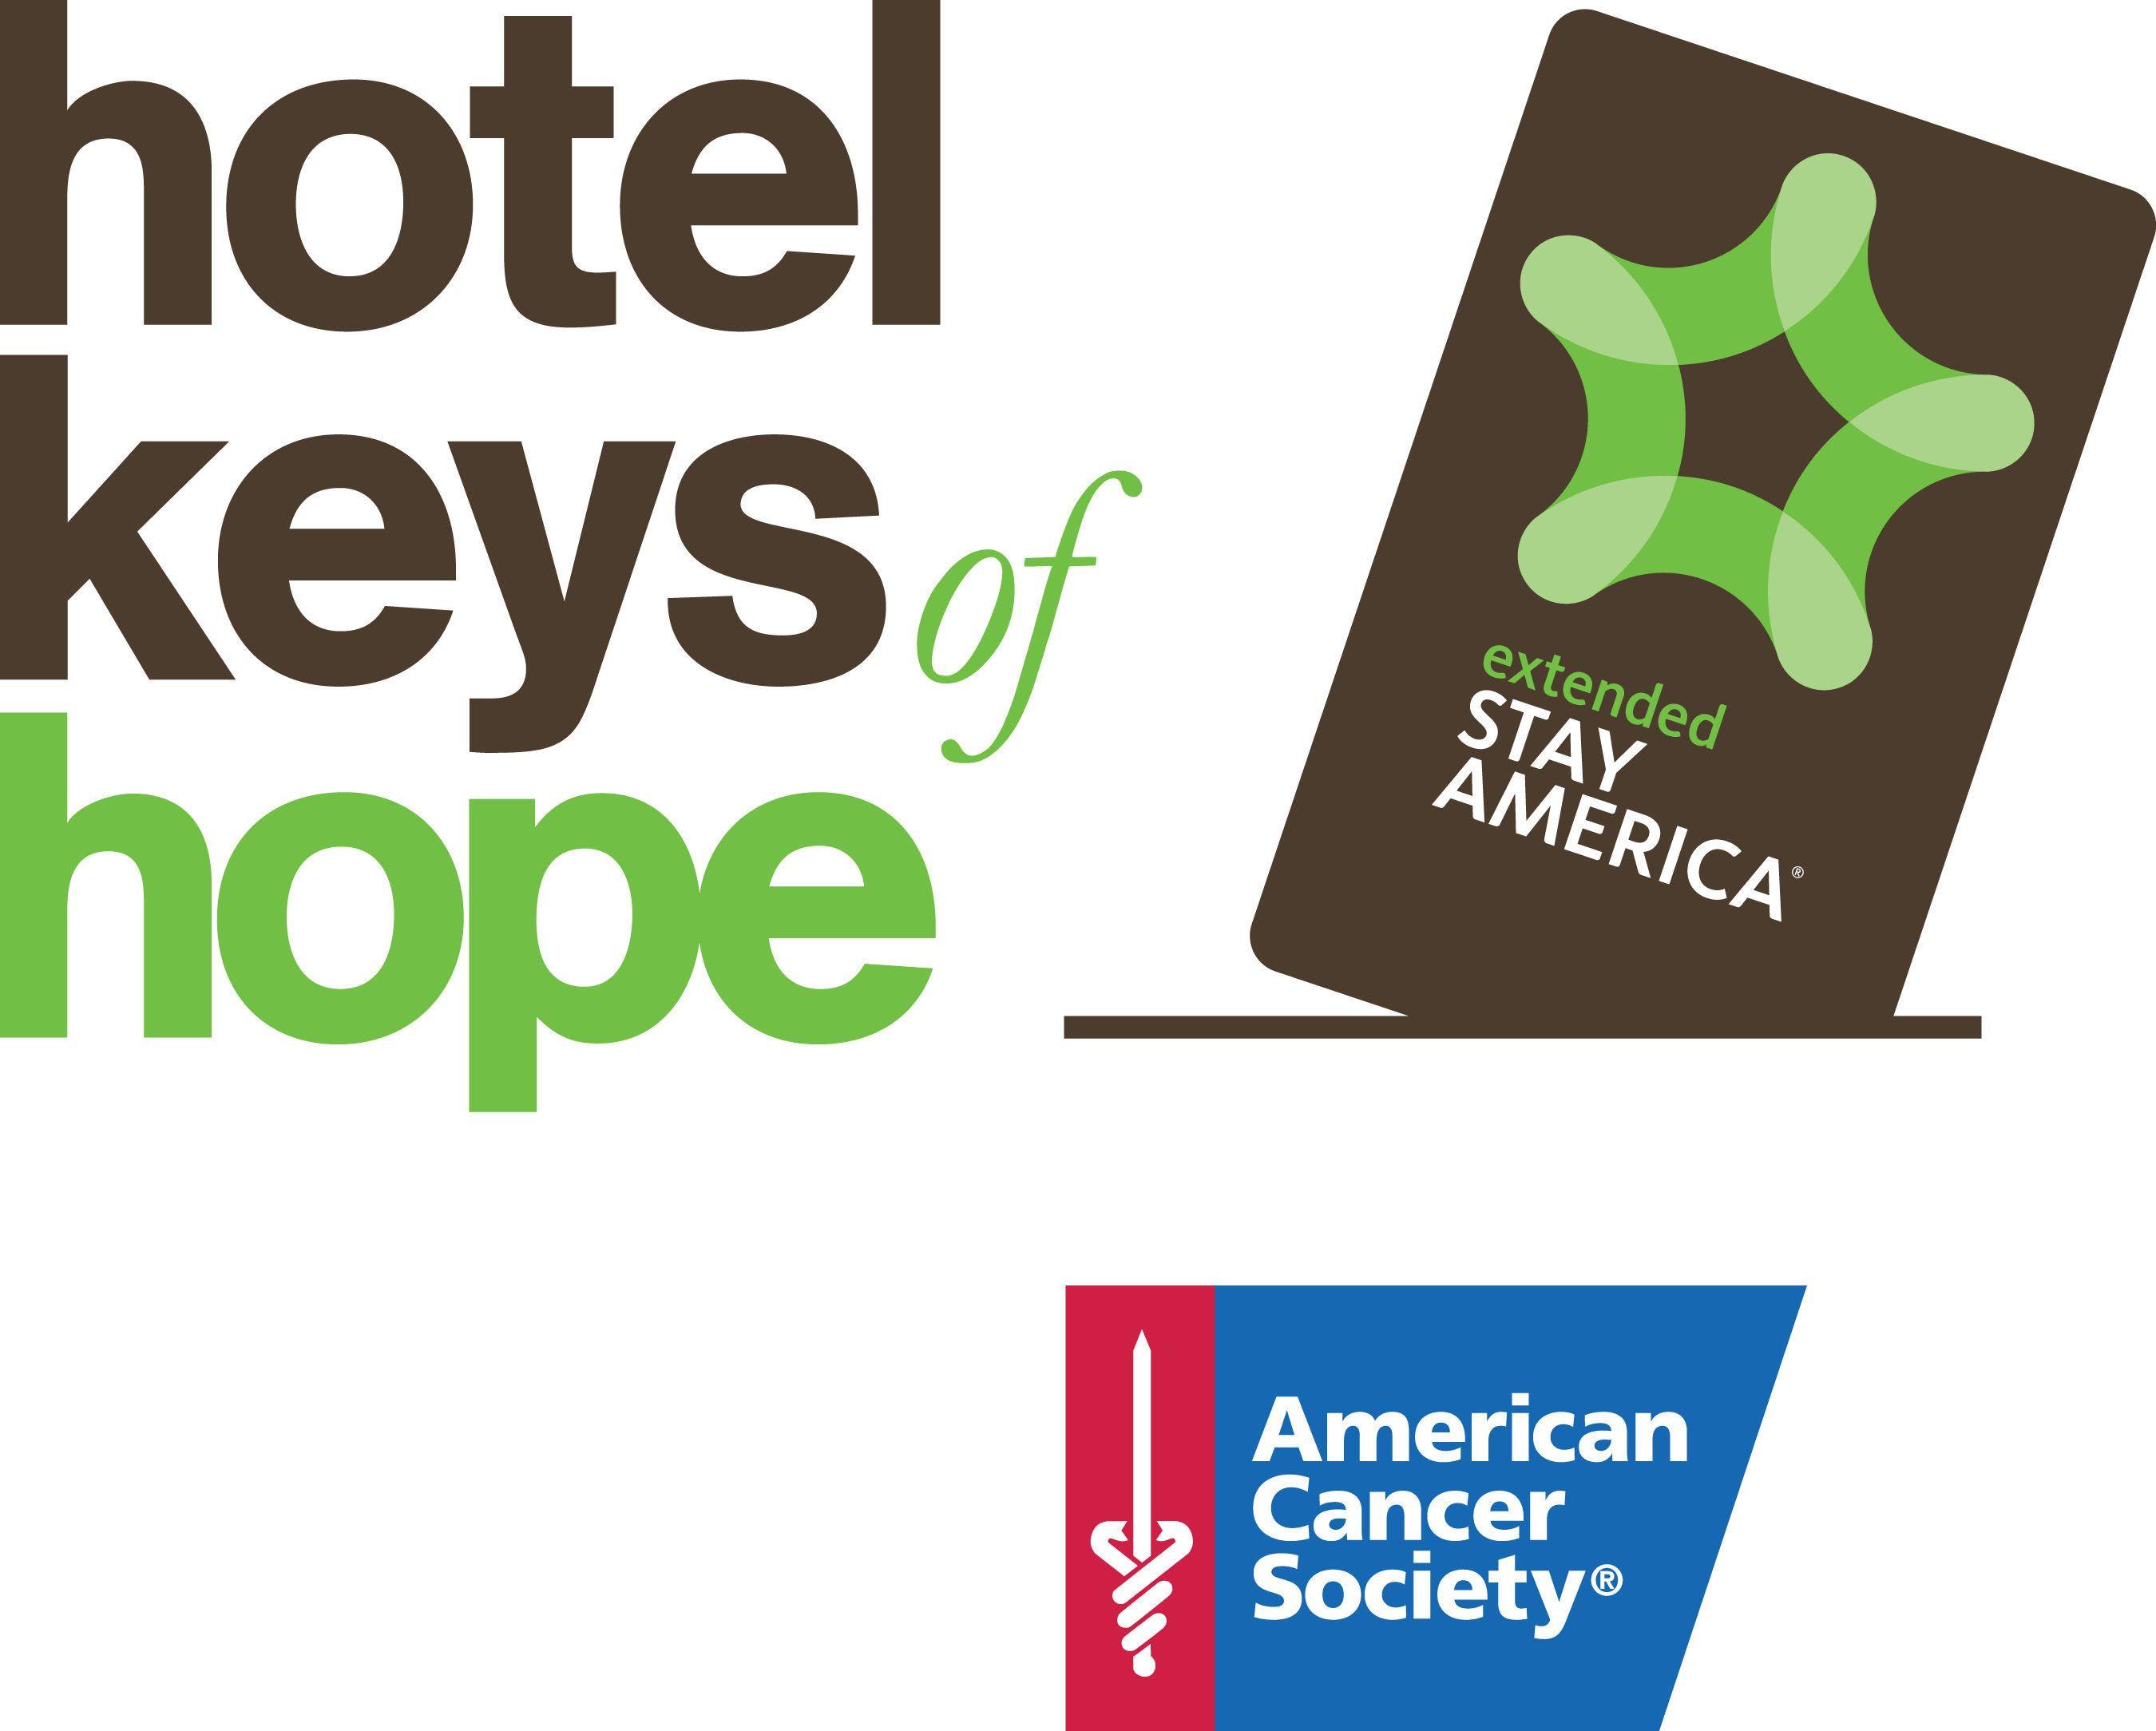 Extended Stay America Logo - Olympic Gymnast Shannon Miller Shares Her Story At Cancer Survivors